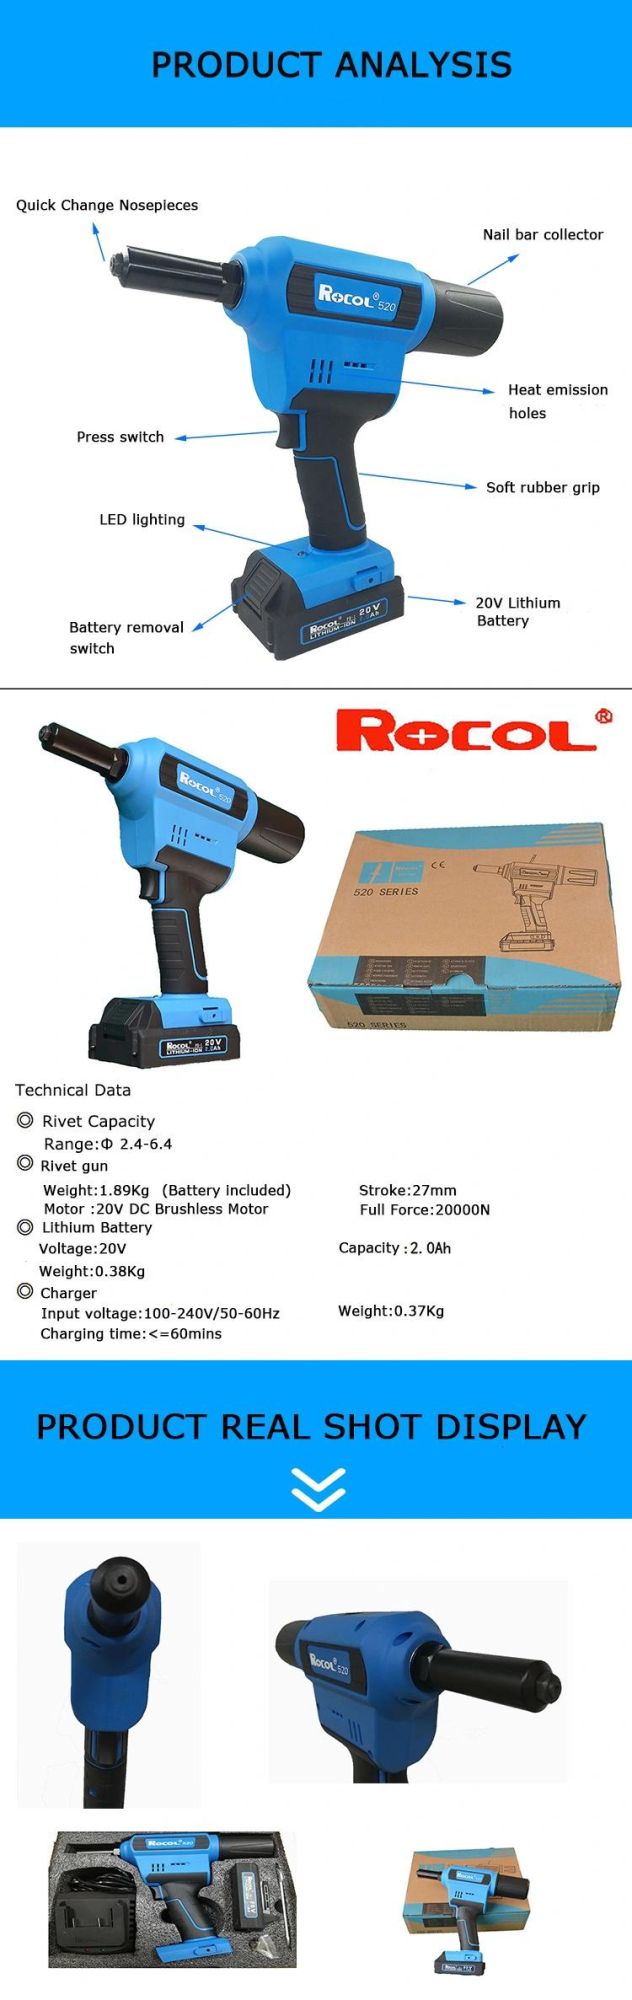 New Generation Quick Charge Large Pull Force Battery Pop Riveting Tool